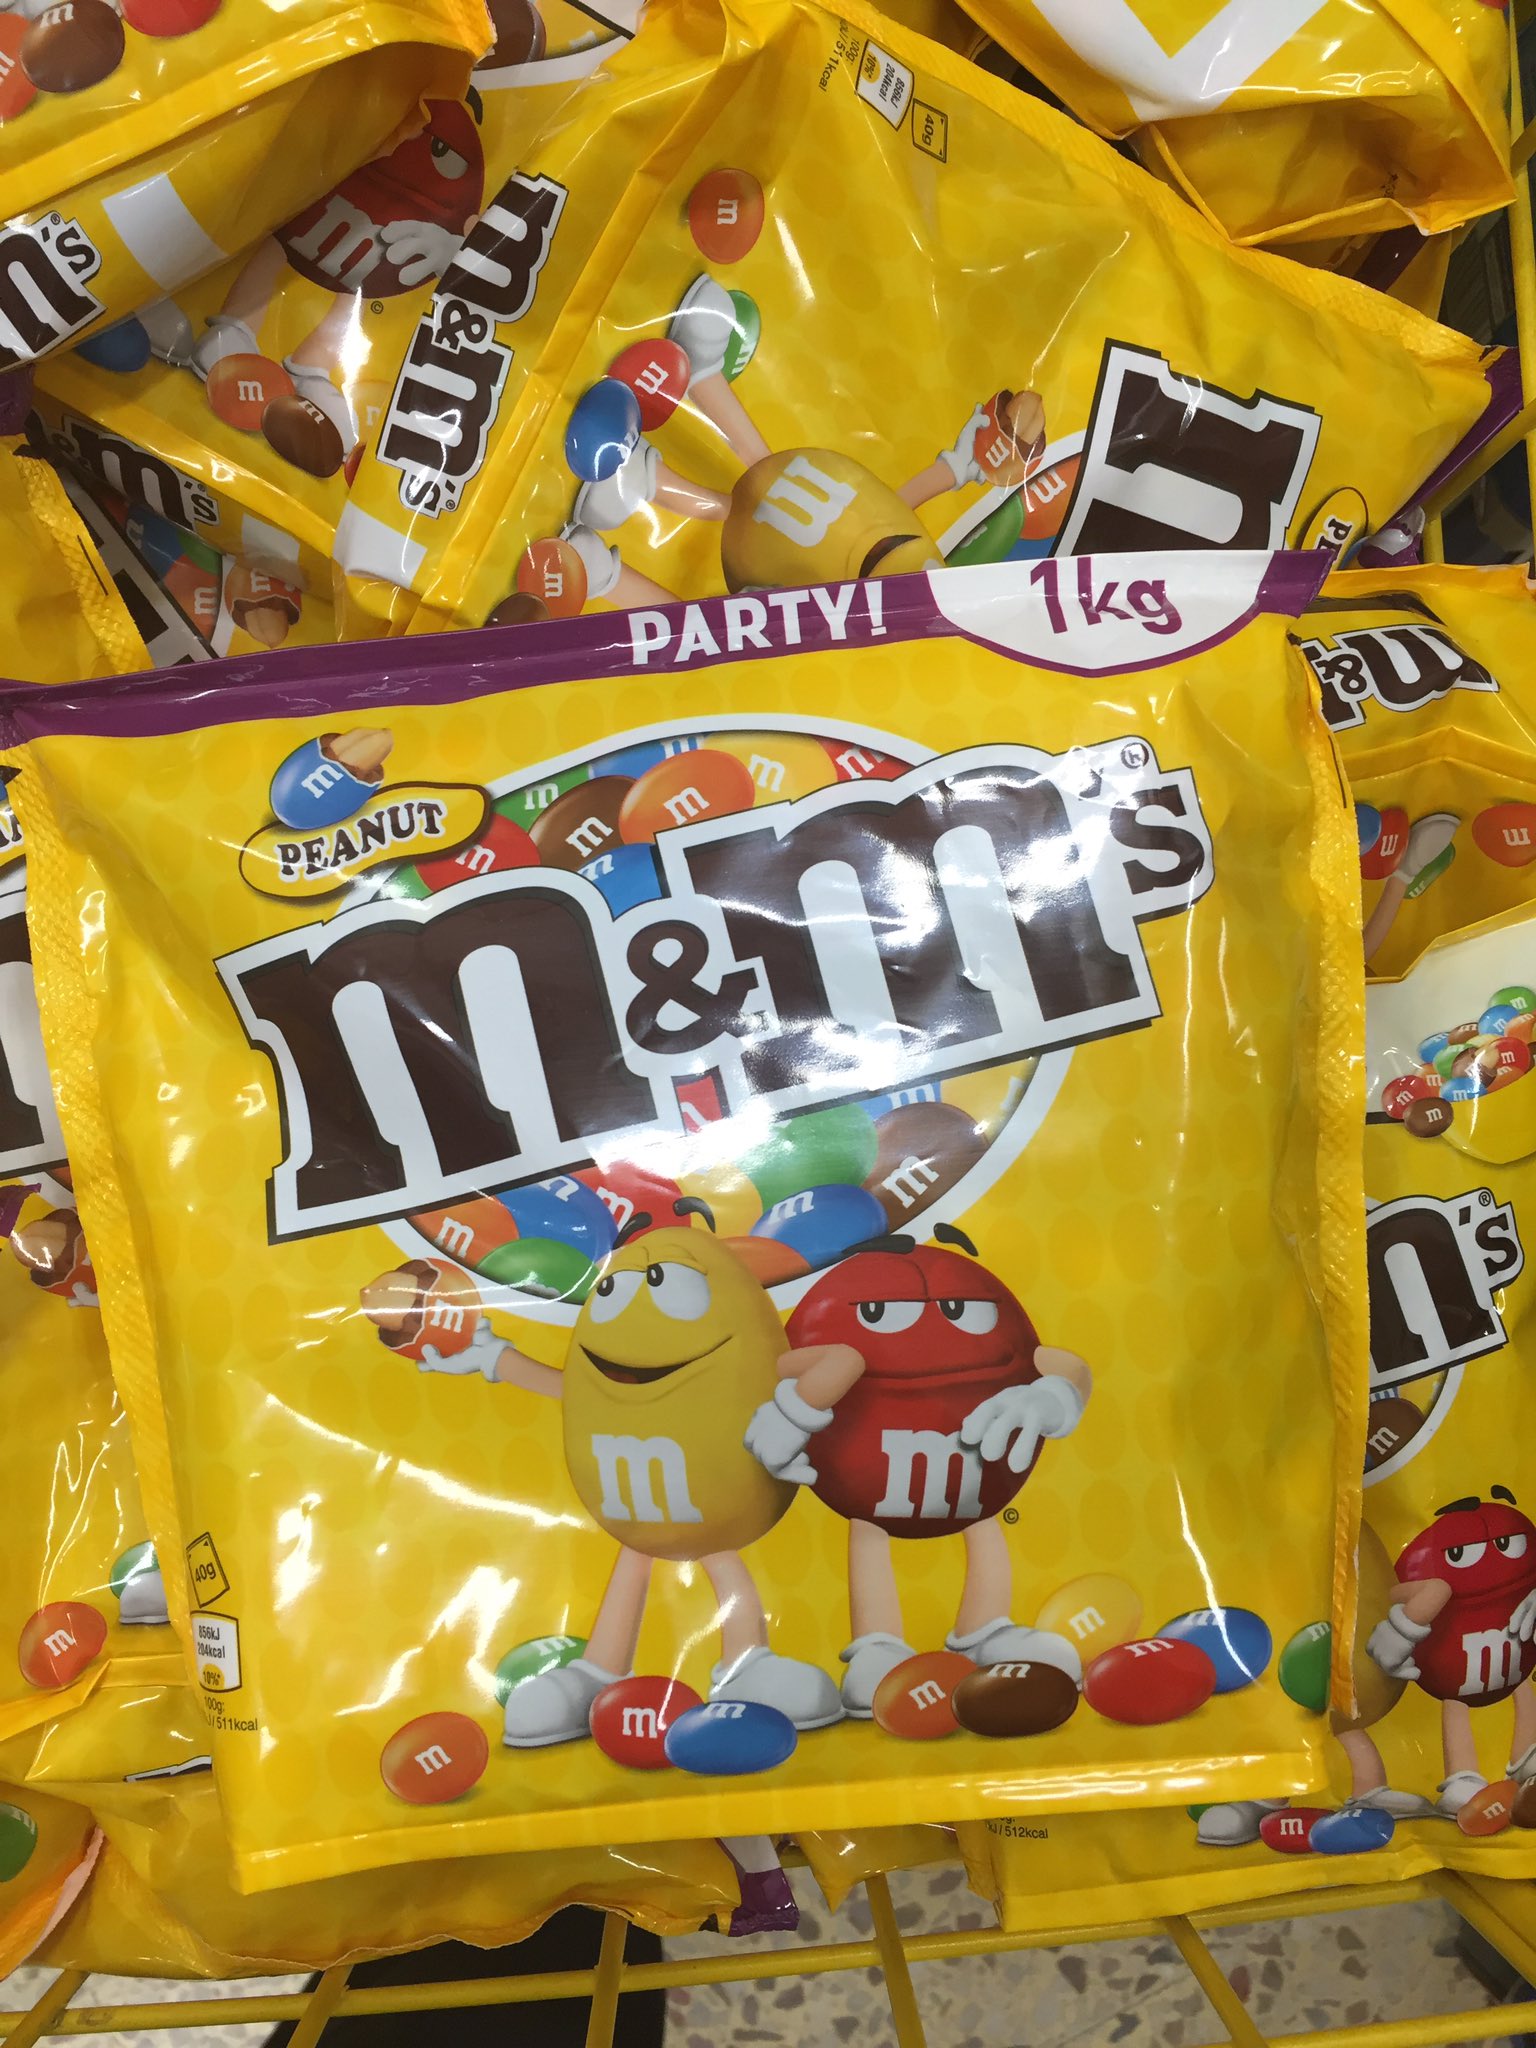 Jeremy Dyer on X: Tesco are selling 1kg bags of peanut M&M's. Not good  when you're trying to loose some weight. Need more will power   / X